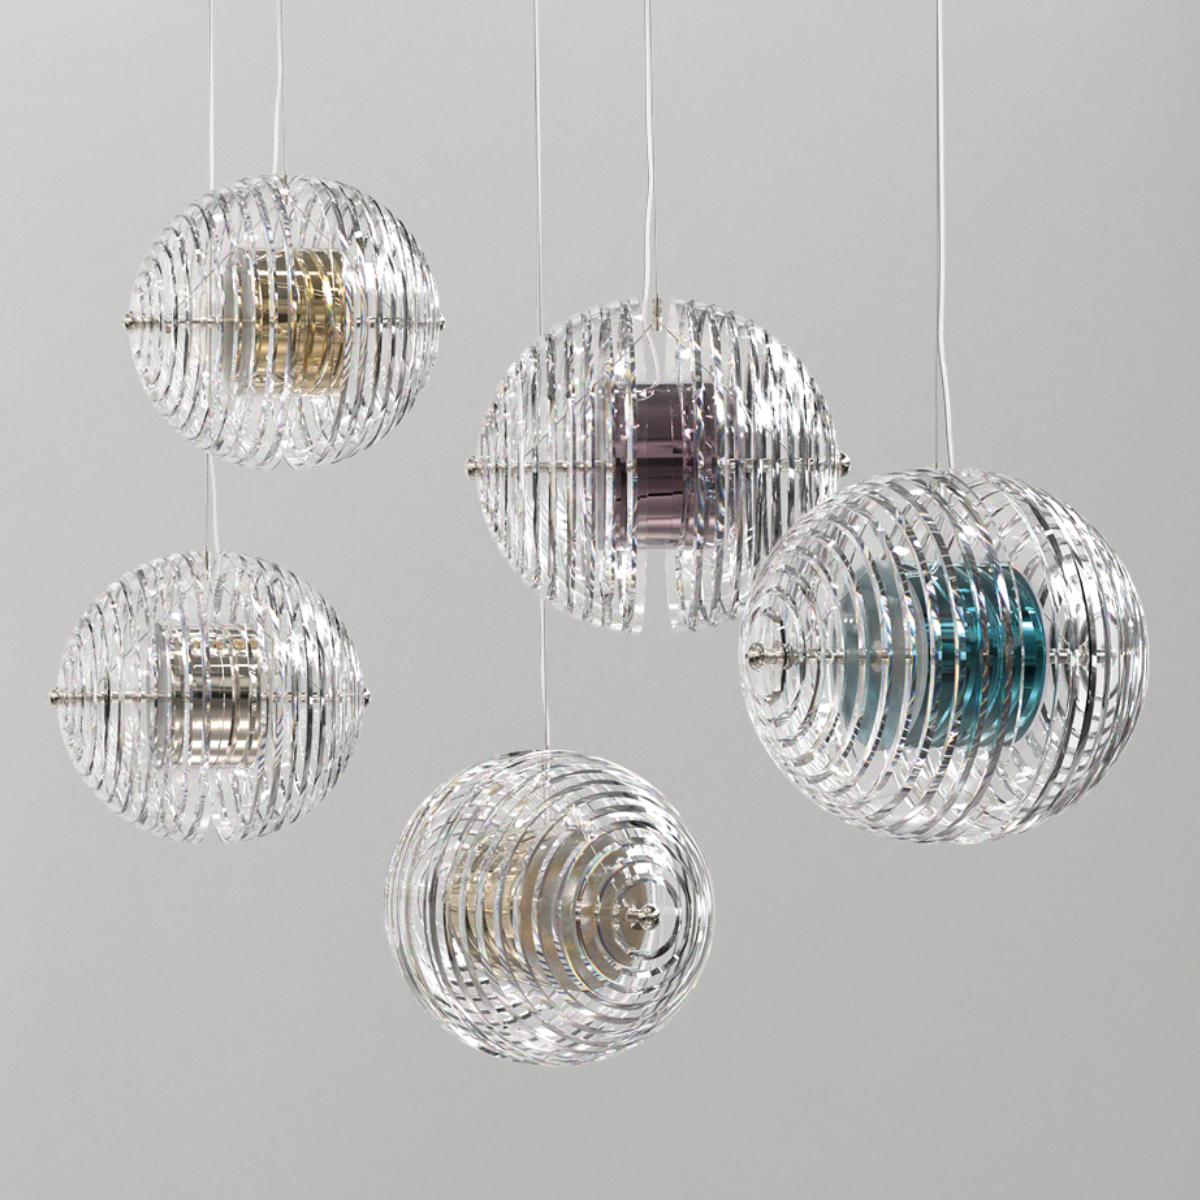 Two continents separate to reveal a shining core.
Glowing beneath the transparent crust of purest crystal.
The light is refracted through cut lines, to cast a stunning light.

The new version of the successful Pangea collection.

Pangea